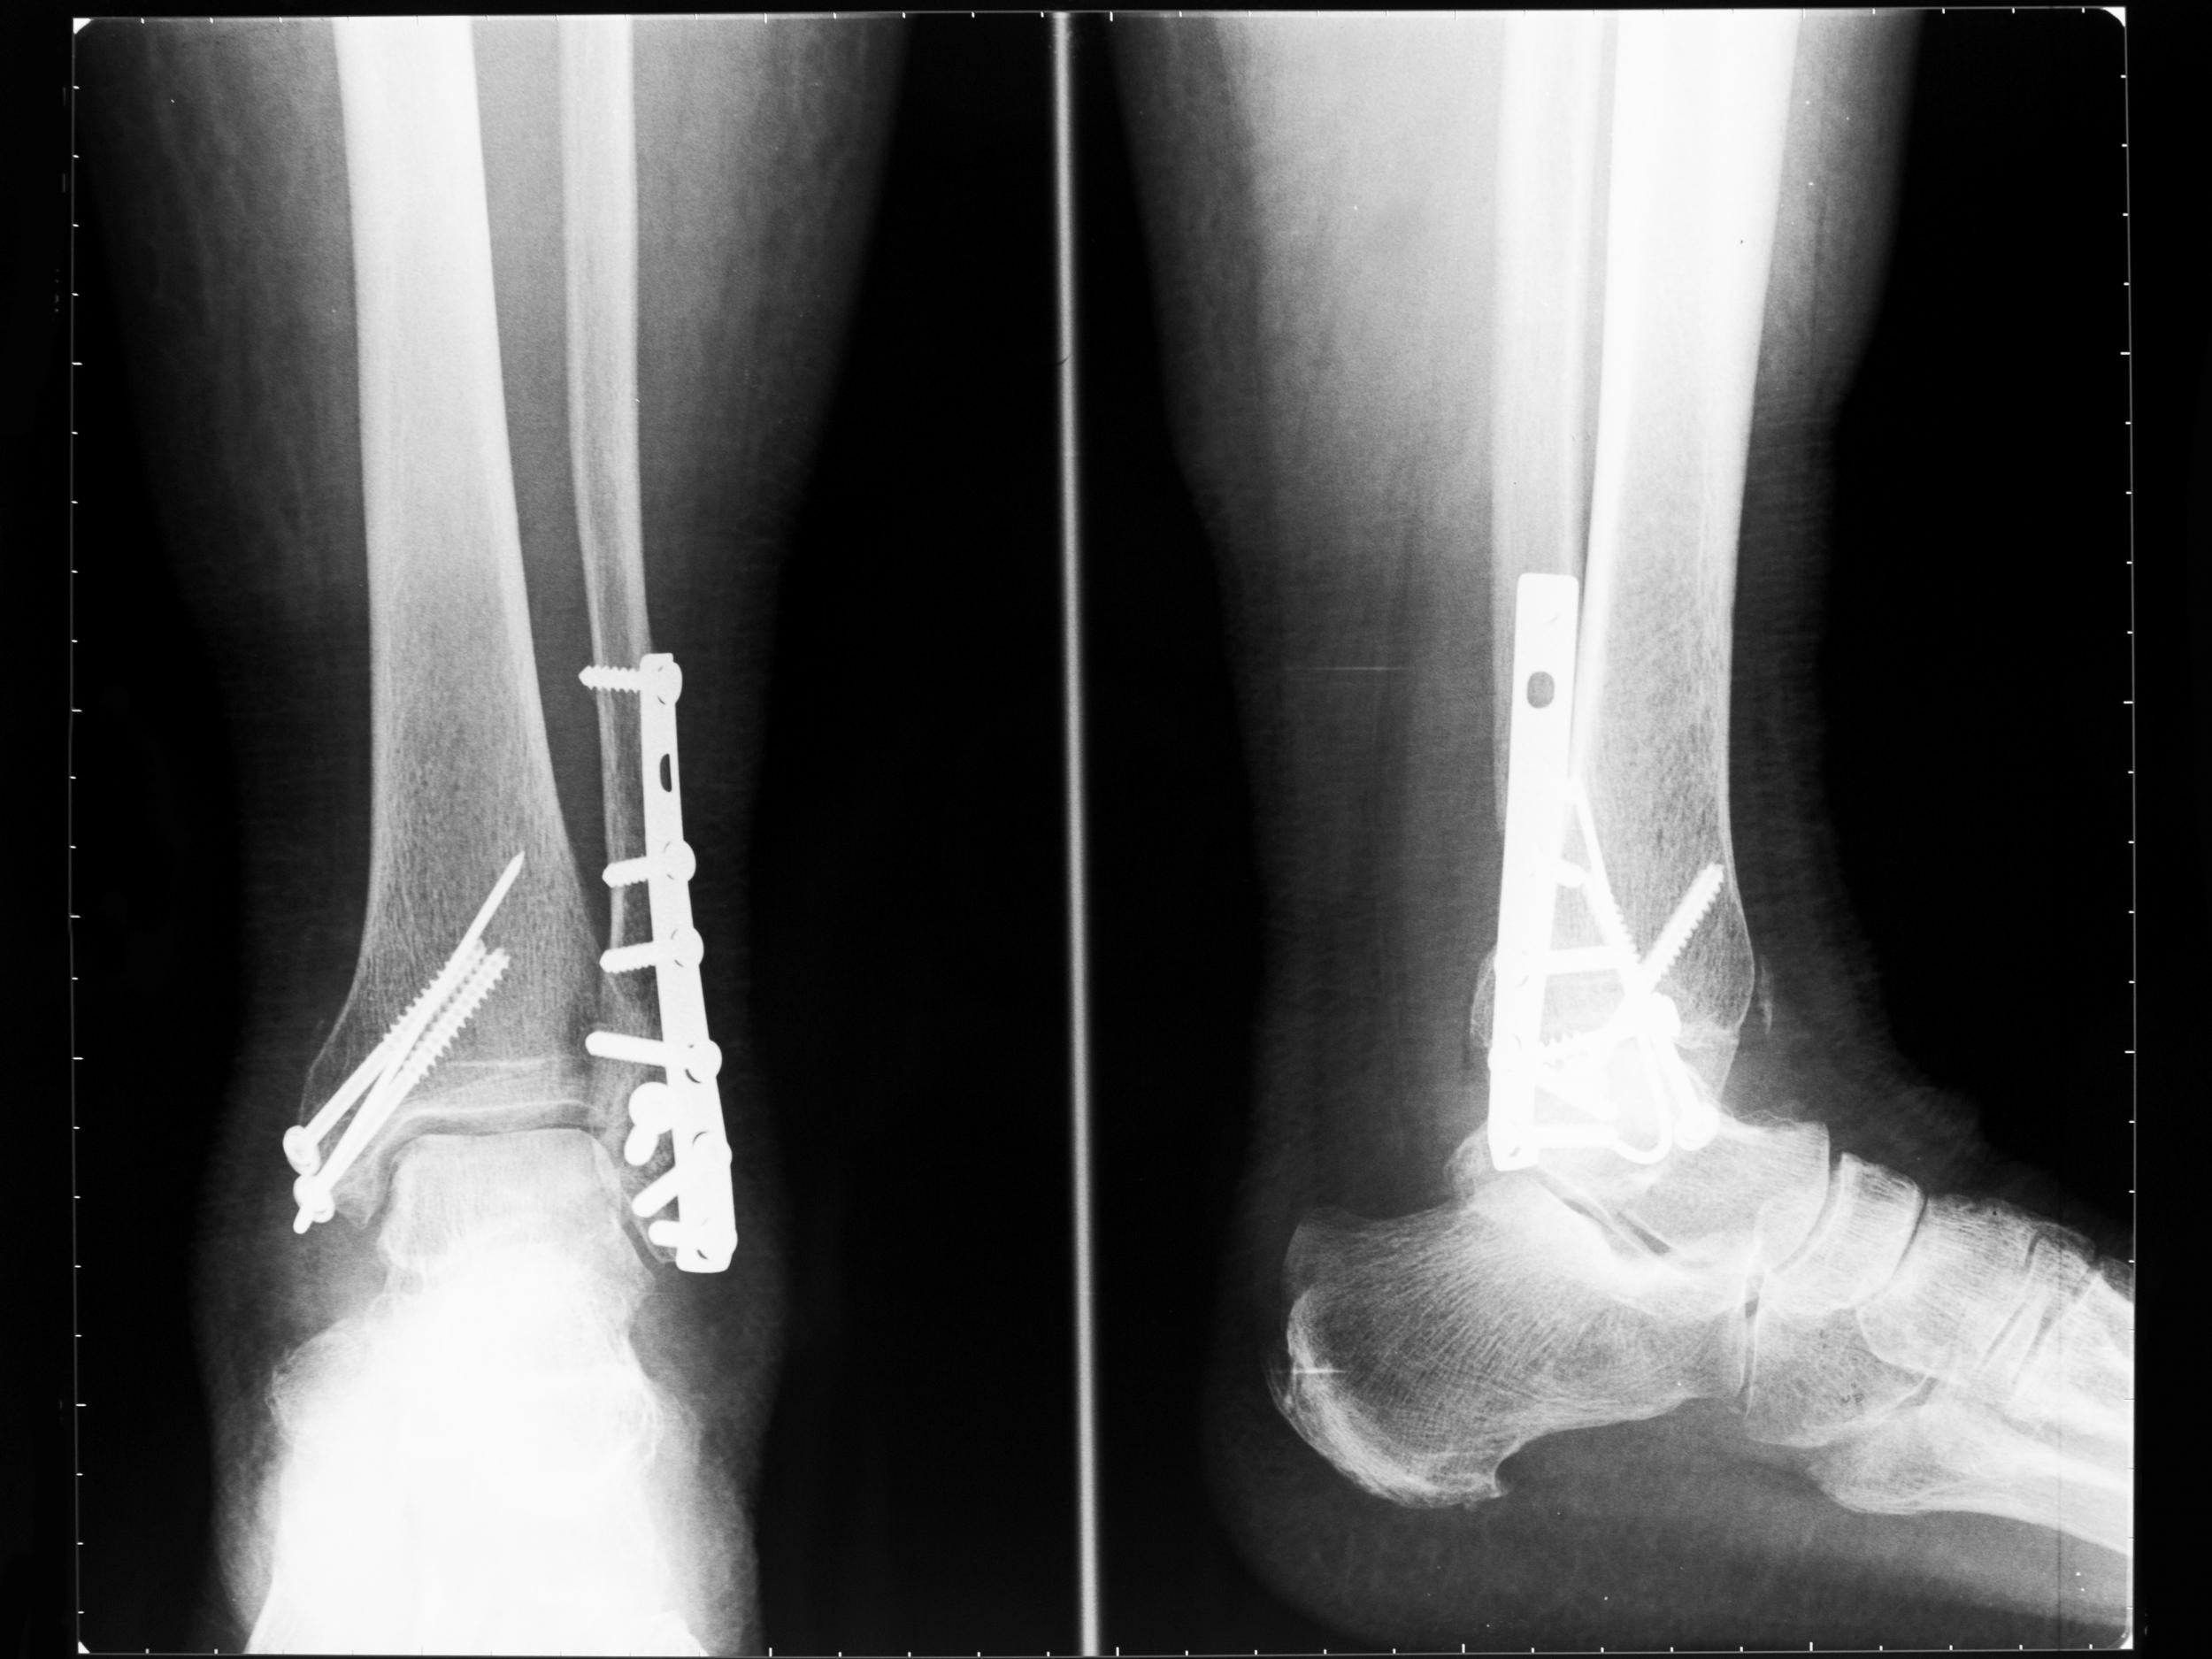 Mix-up meant flexible metal plates meant for complex surgical repairs used for weight-bearing shin, thigh and arm fractures